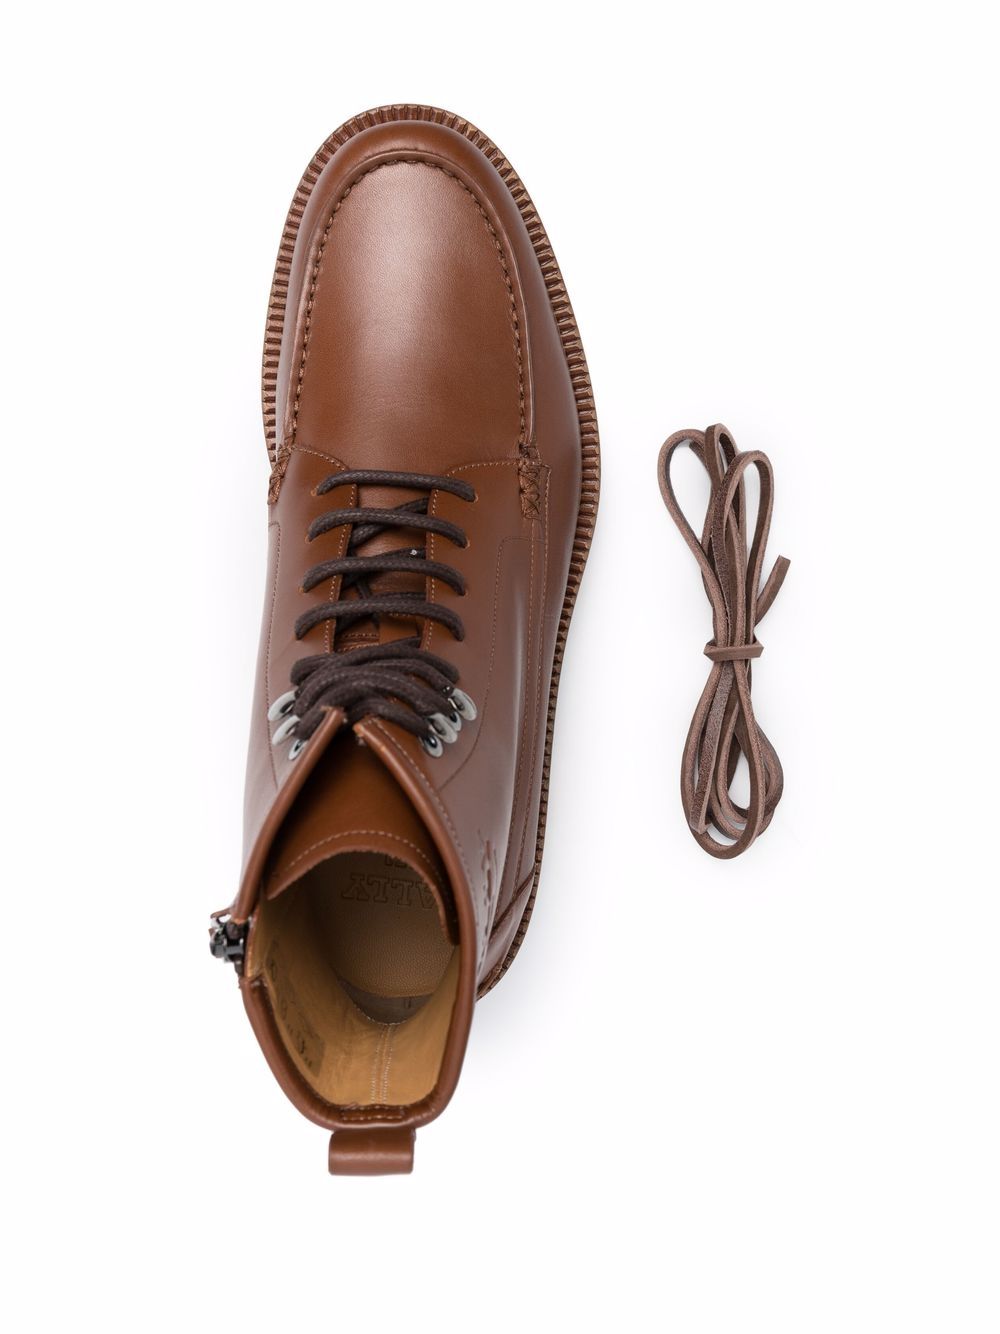 BALLY Nokor Leather Lace-Up Boots Brown